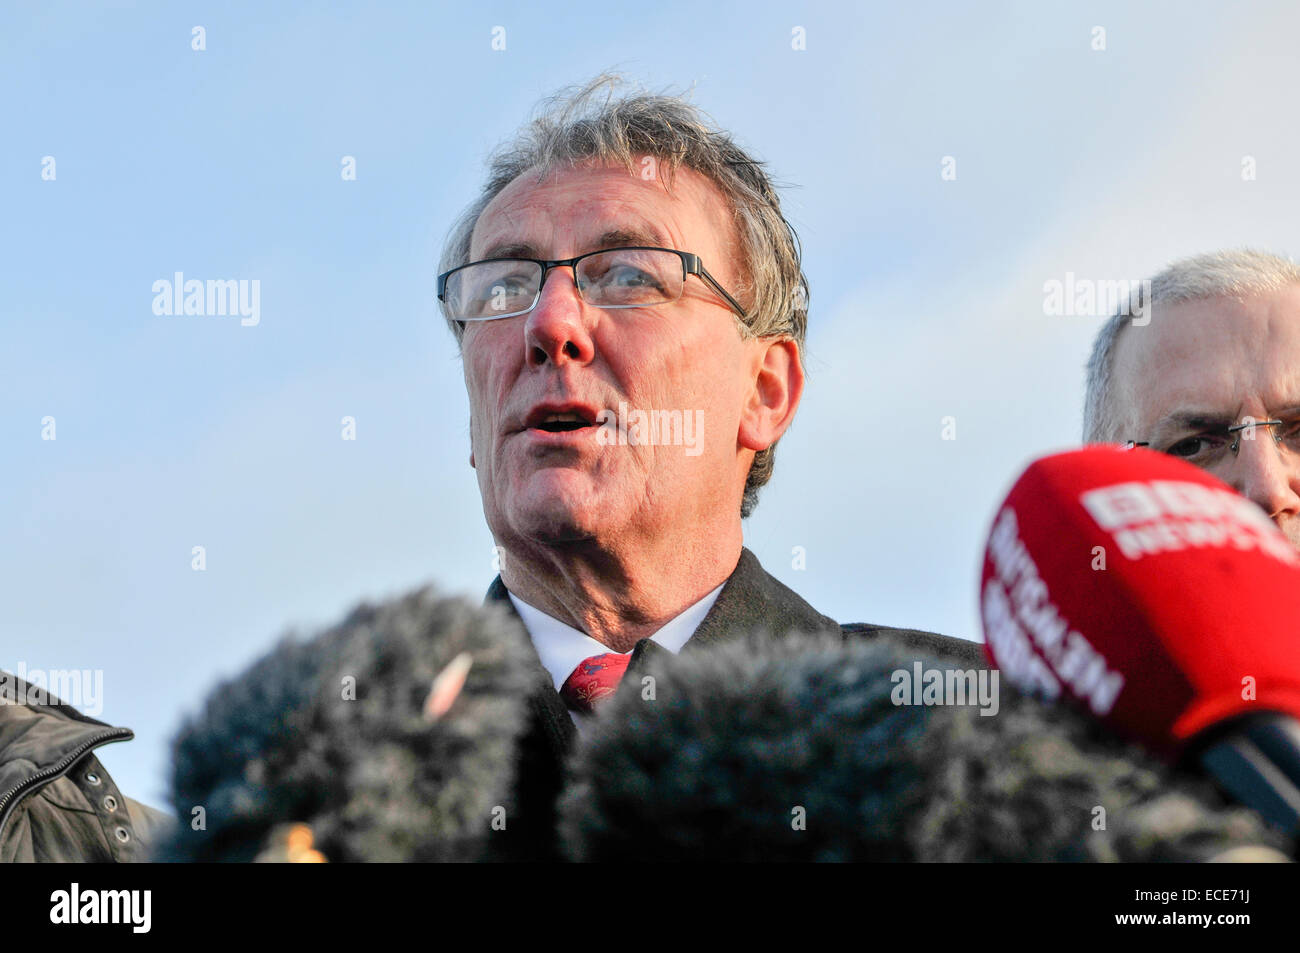 Belfast, Northern Ireland, 12 Dec 2014 - Mike Nesbitt, leader of the Ulster Unionist Party, gives his reaction to the collapse of talks intended to reach a political deal at Stormont. Credit:  Stephen Barnes/Alamy Live News Stock Photo